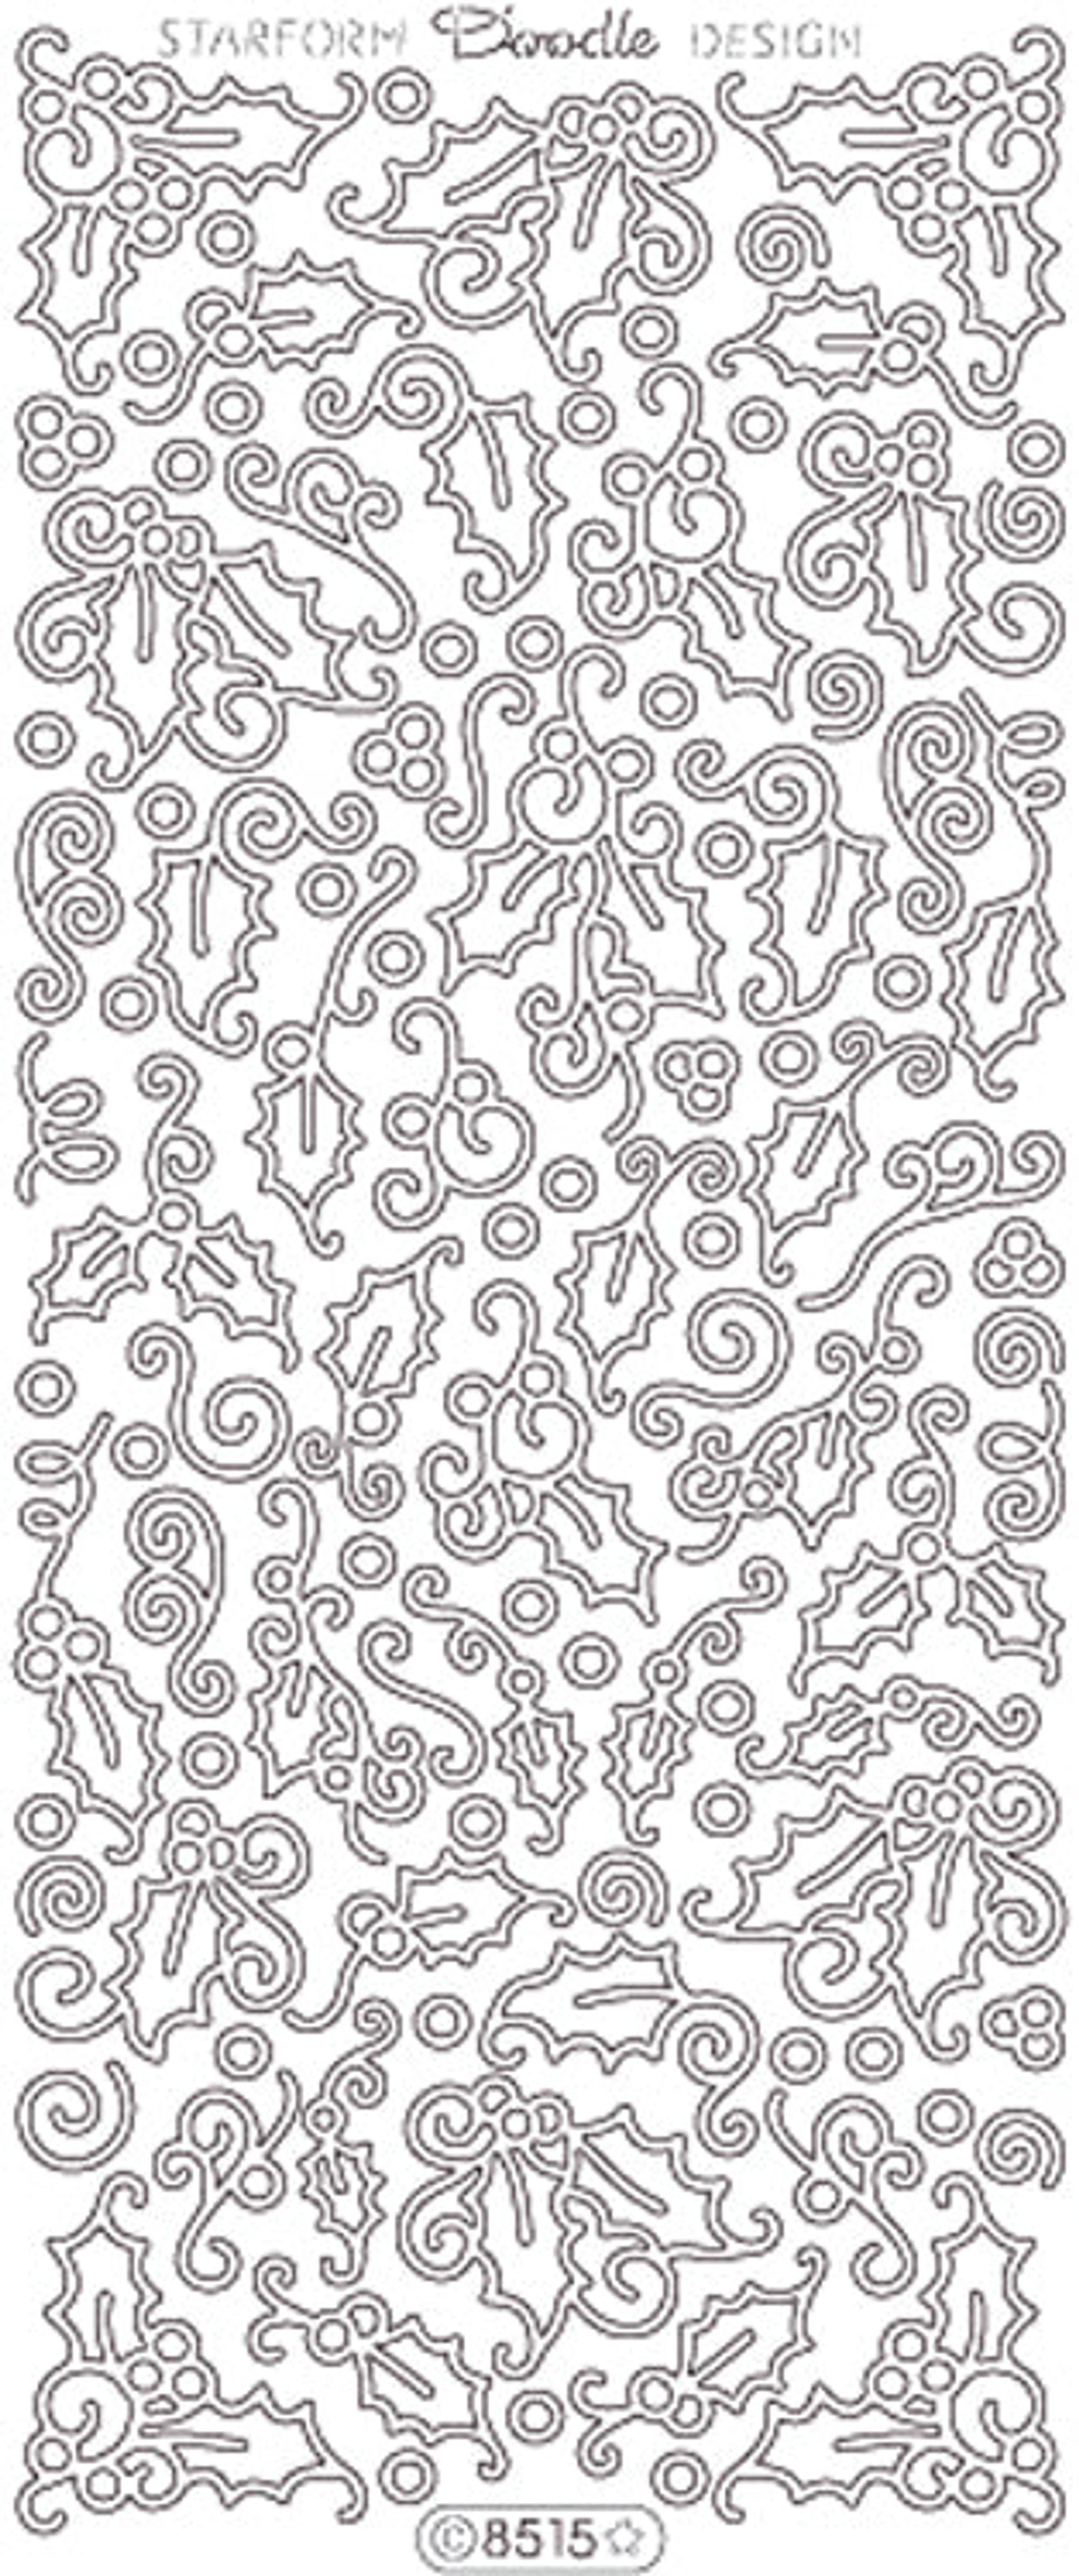 Deco Stickers -Swirls and Holly